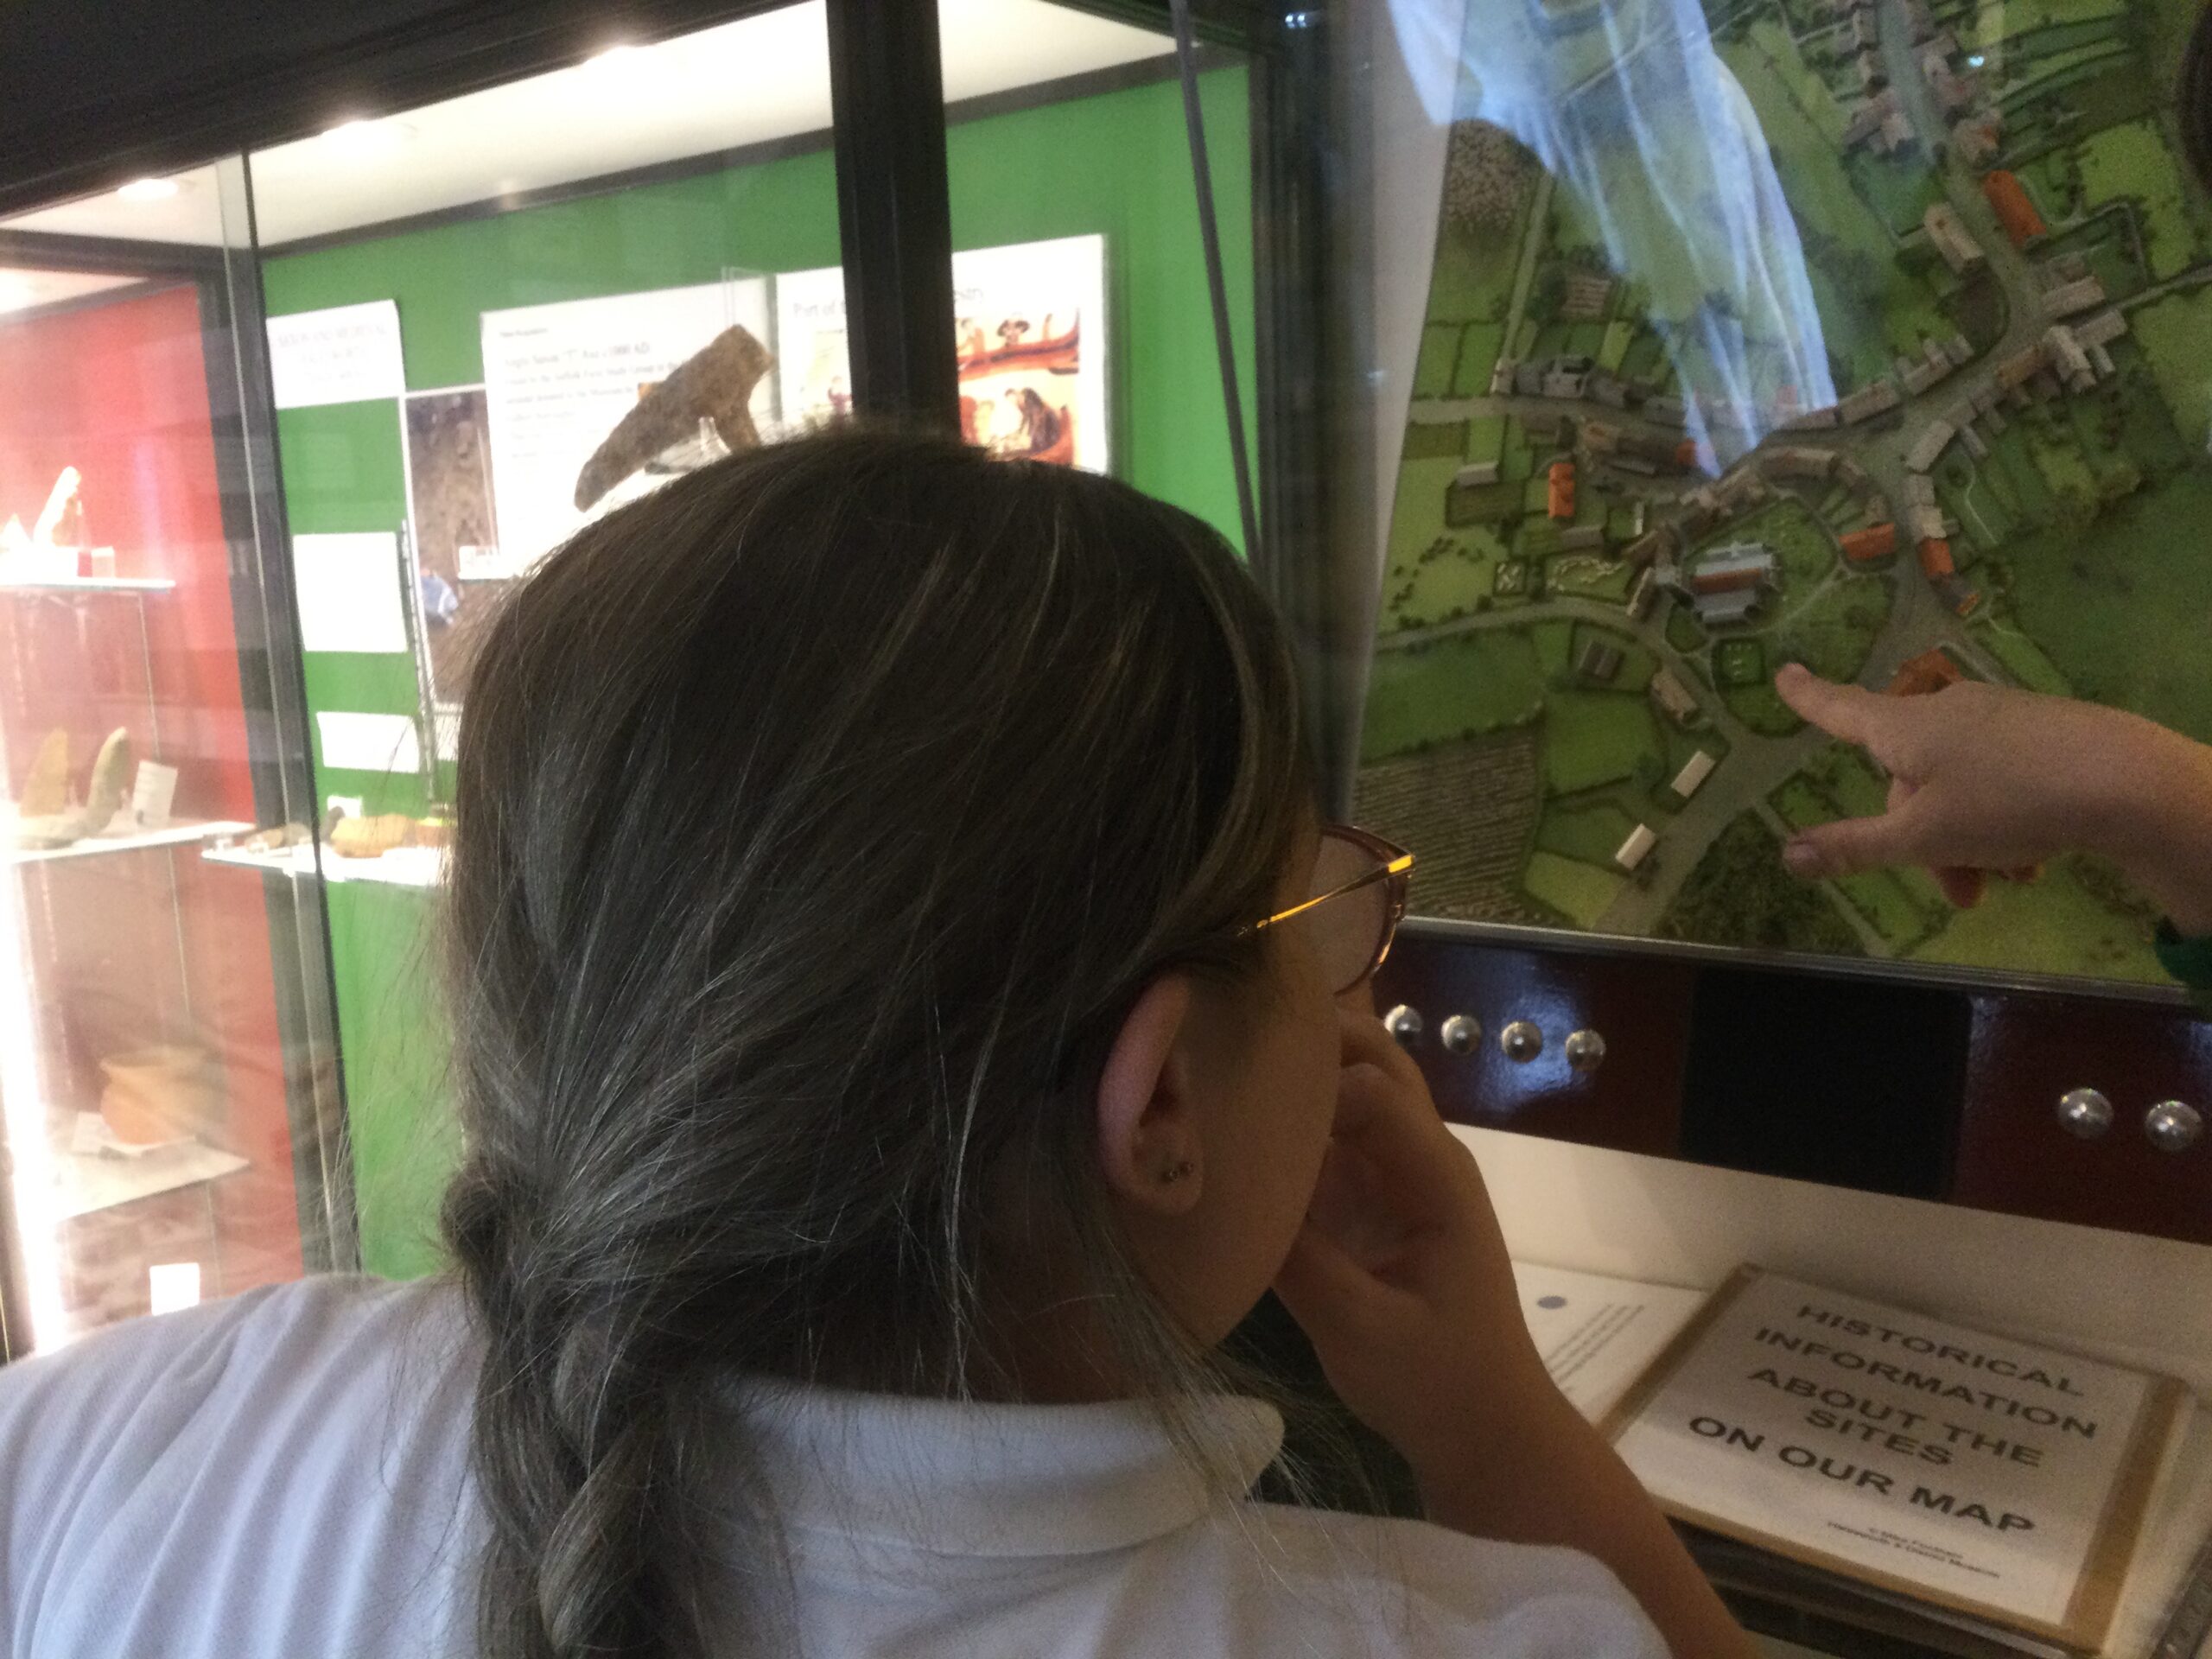 A child looks closely at a map, with a second child pointing out a particular spot. Light bounces off the glass case, making it difficult to see the map in detail.